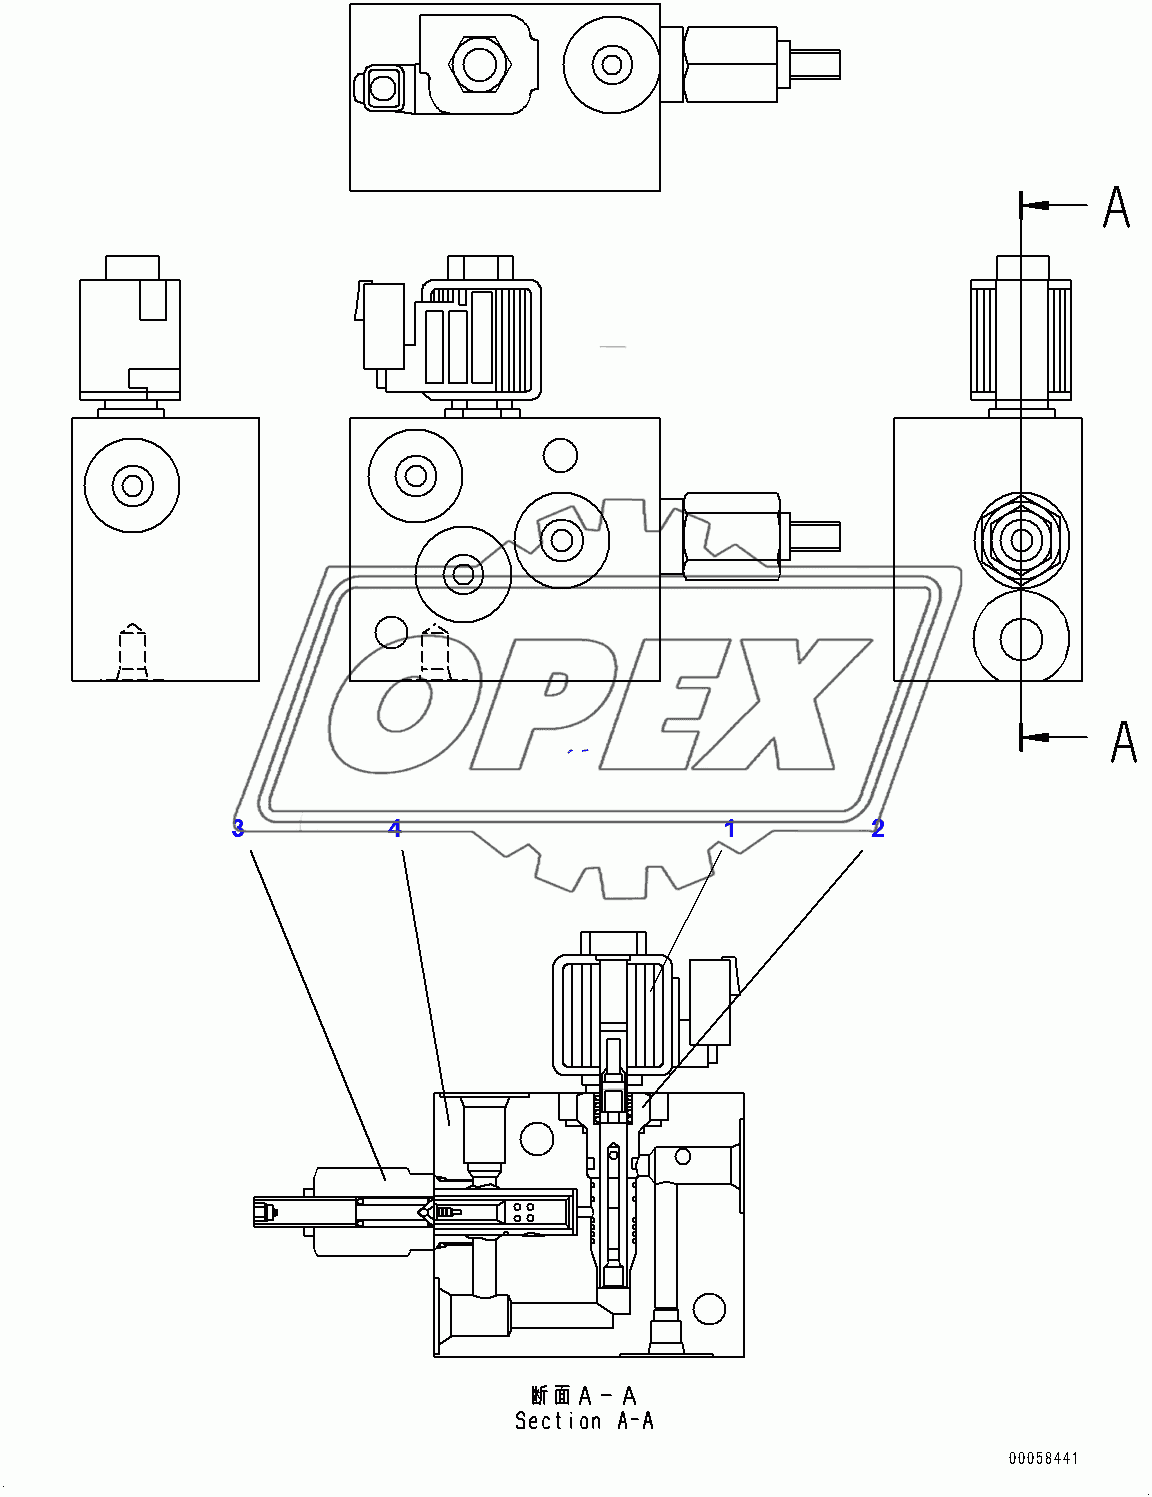  Quick Coupler Piping, Valve (400001-)